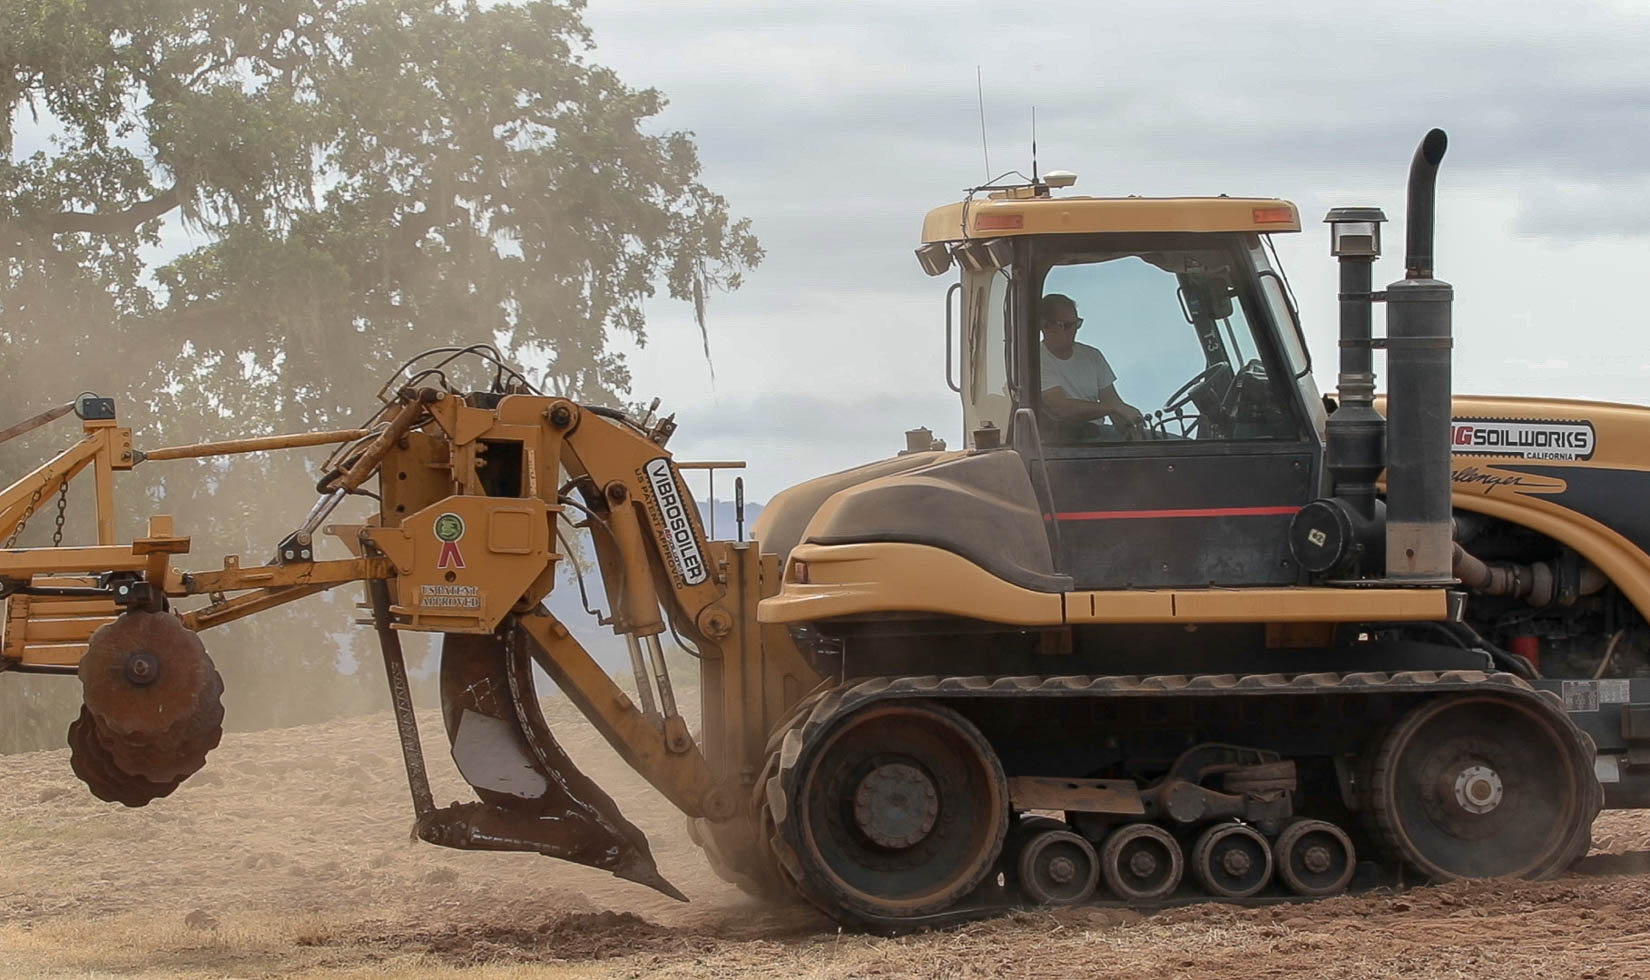 Profile of a vineyard soil deep ripping tractor. Dust hangs in the air and a man in a white t-shirt and sunglasses sits in the cab.